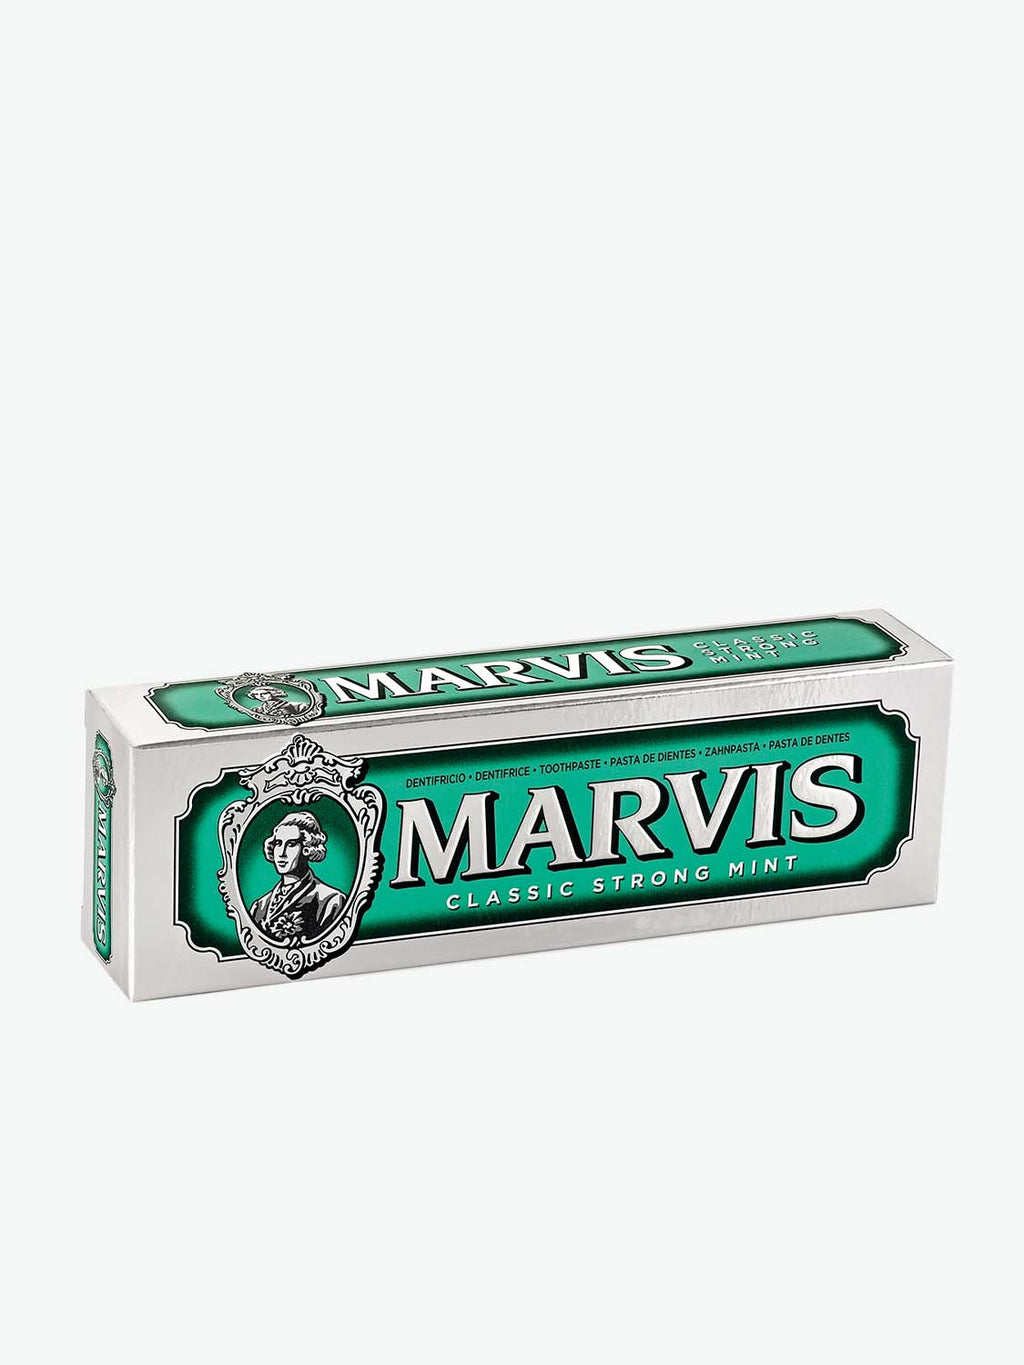 Marvis Classic Strong Mint Toothpaste XXL Limited Edition